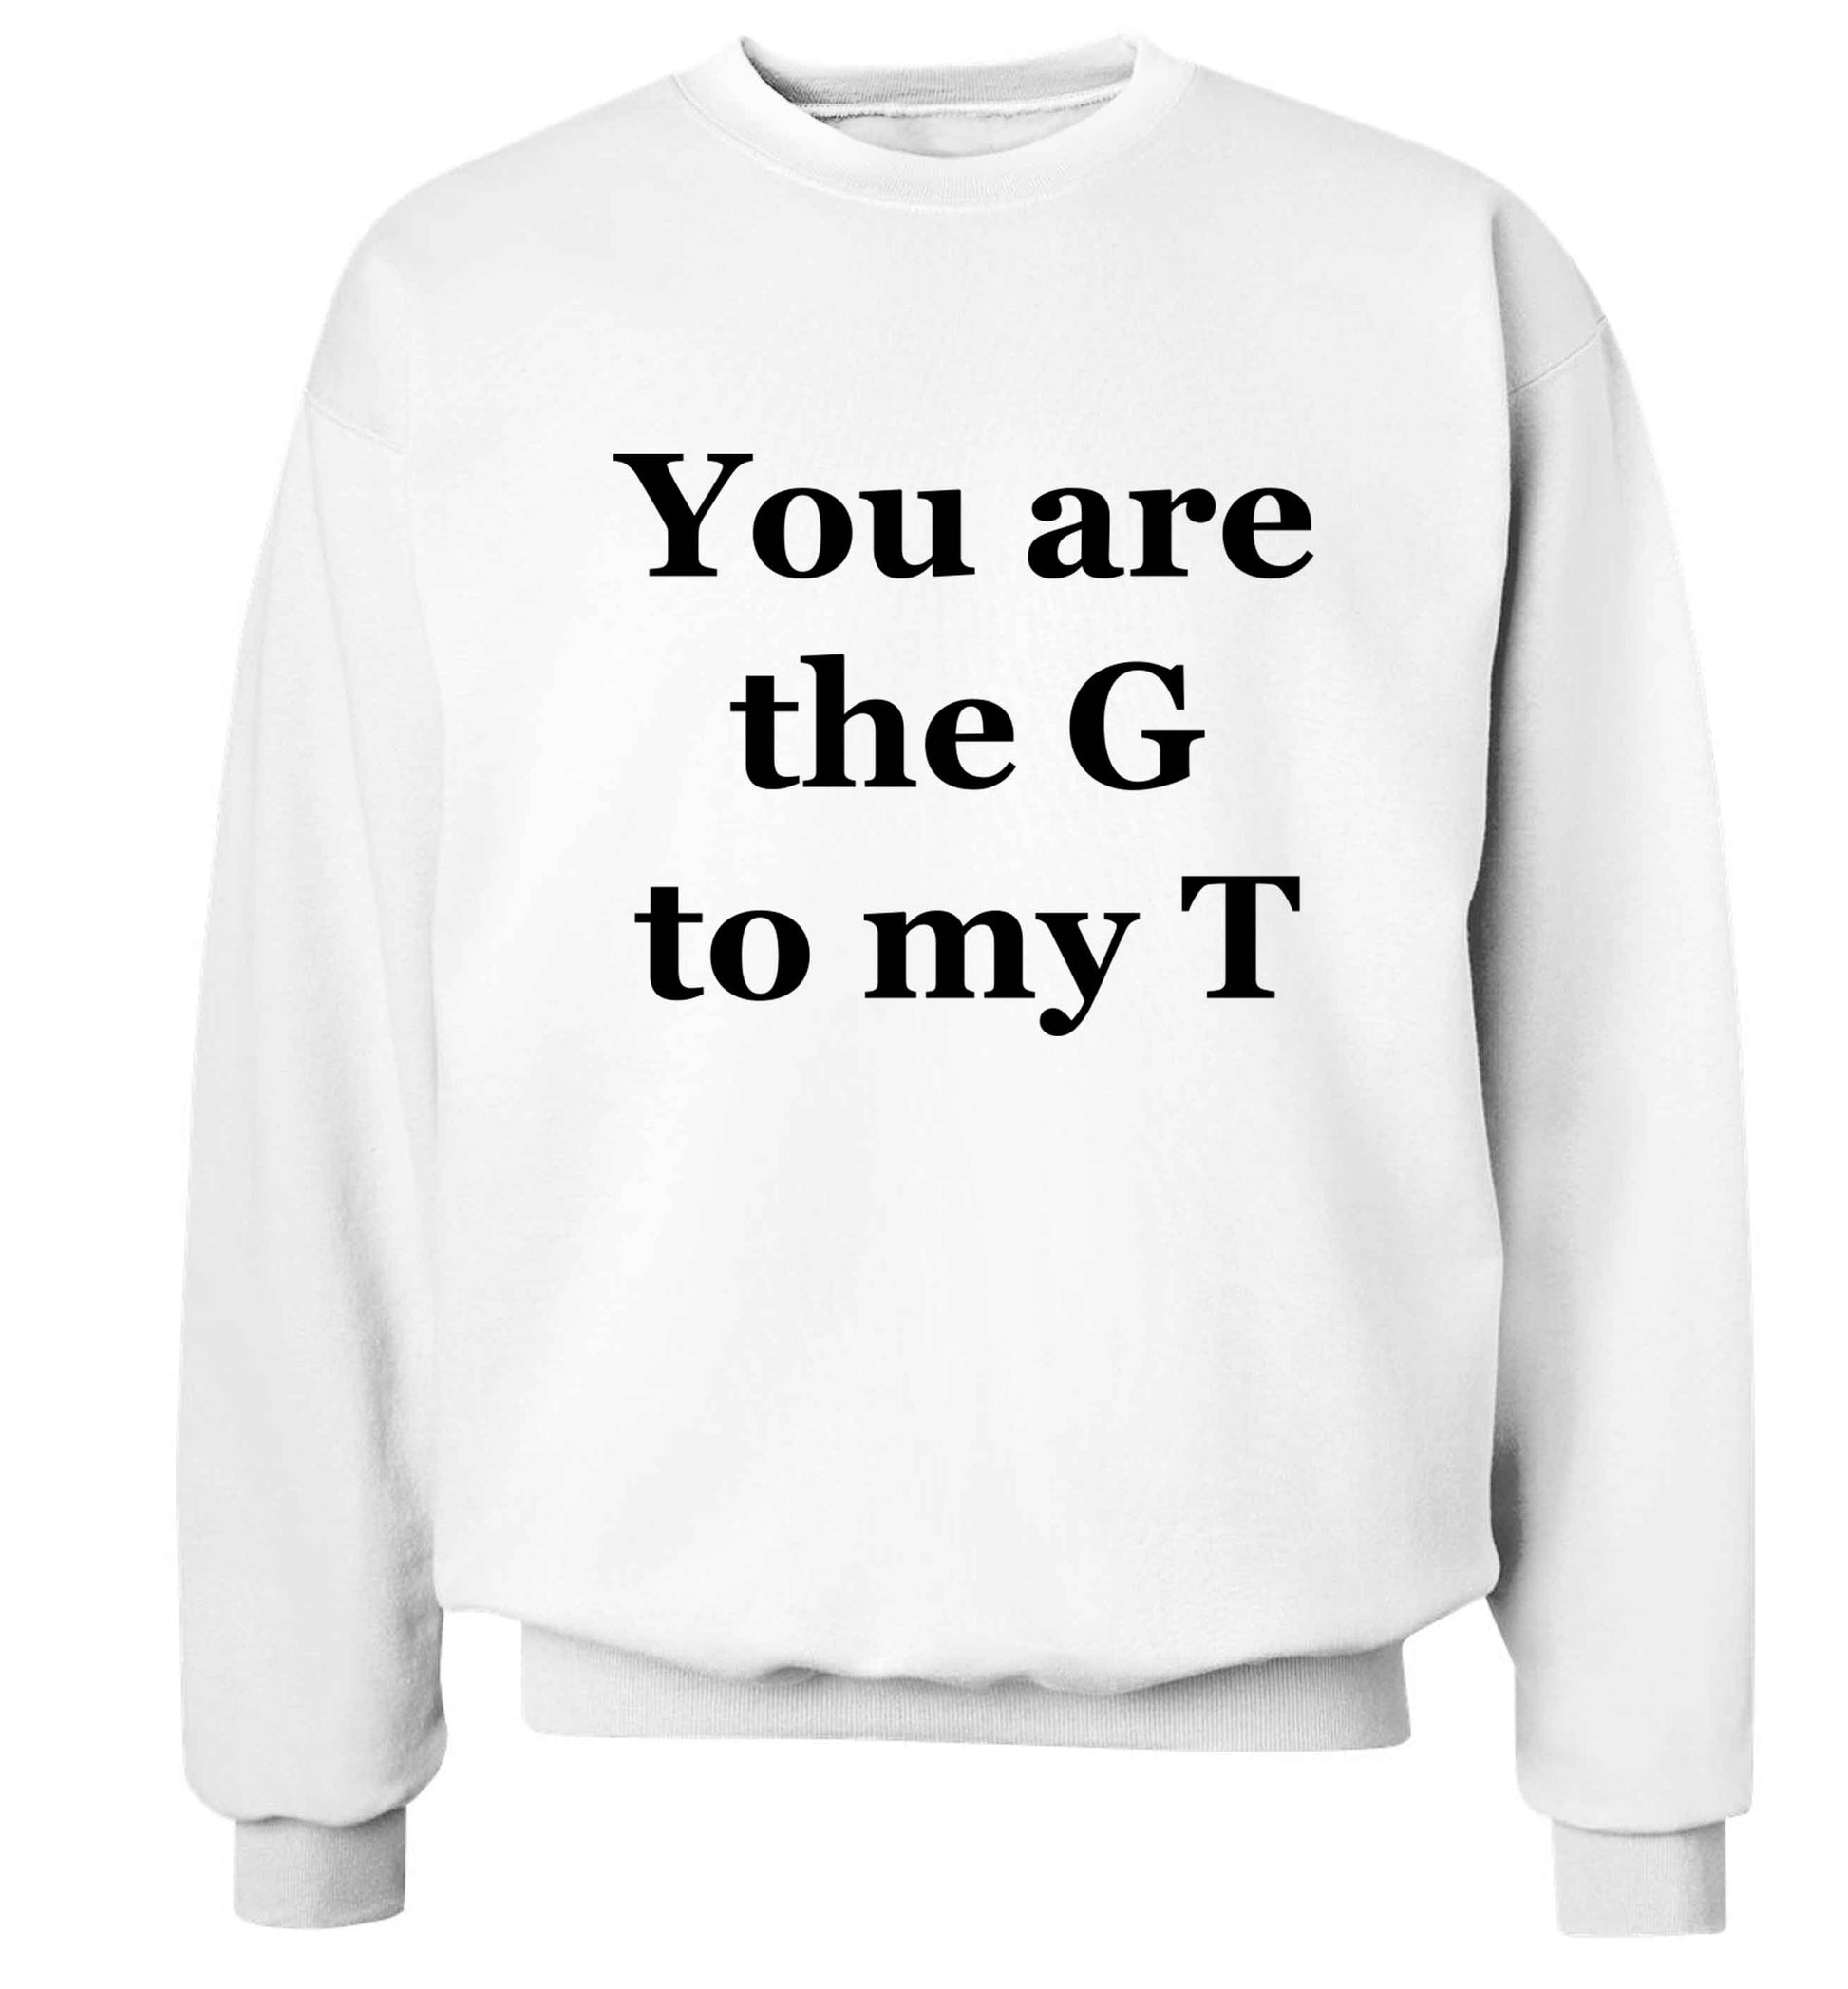 You are the G to my T Adult's unisex white Sweater 2XL